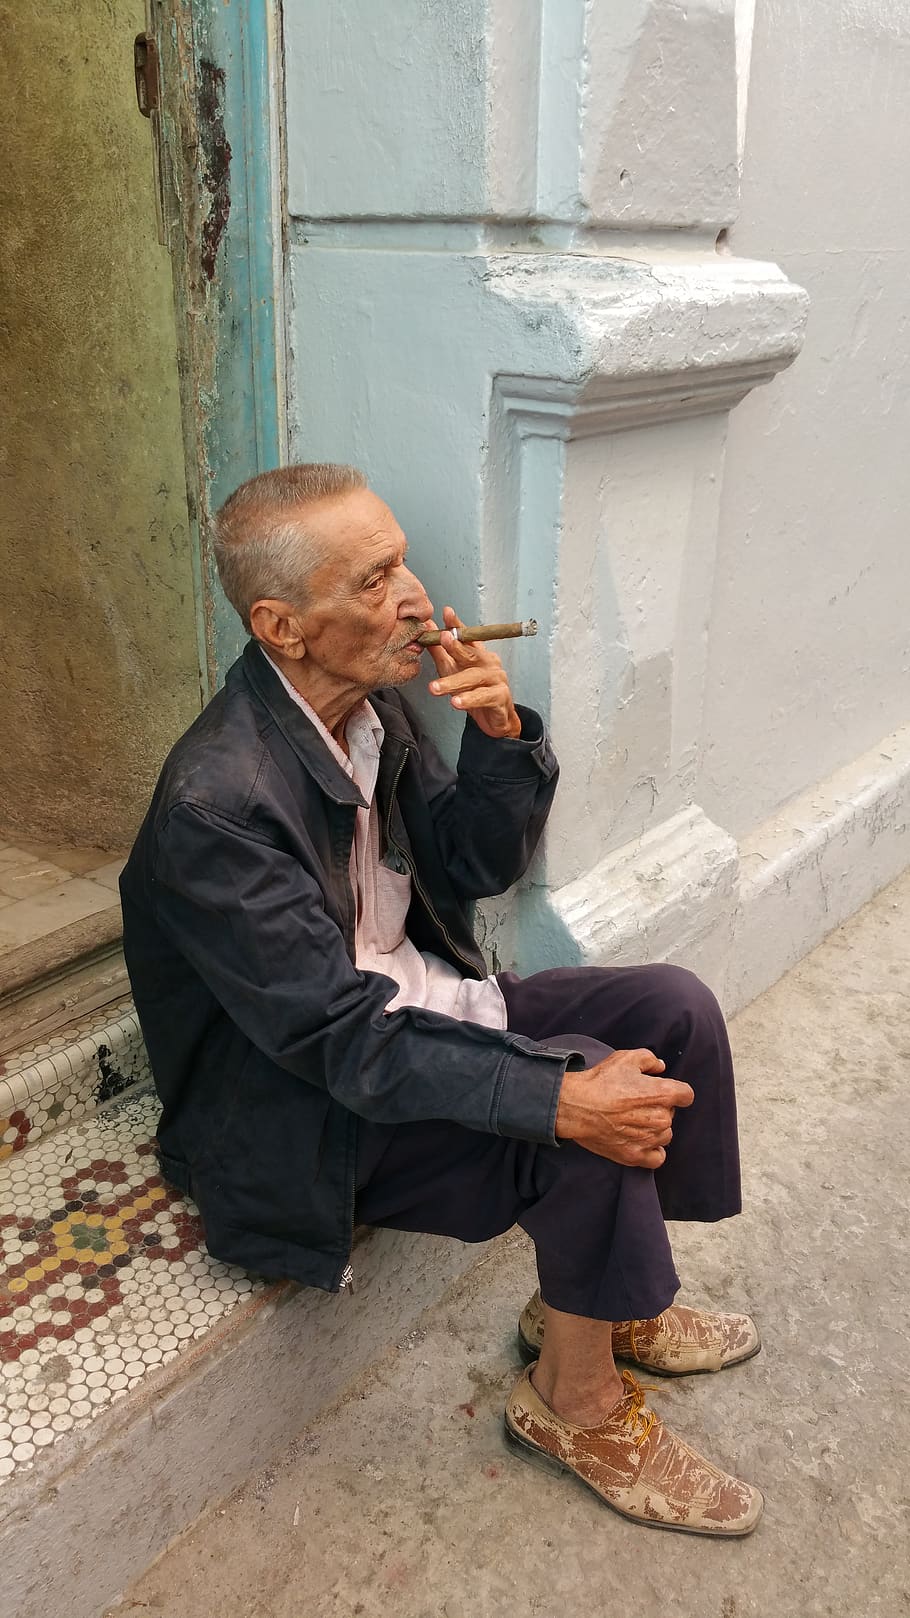 cuba, smoking, old, havana, cigar, vintage, aged, person, one person, real people